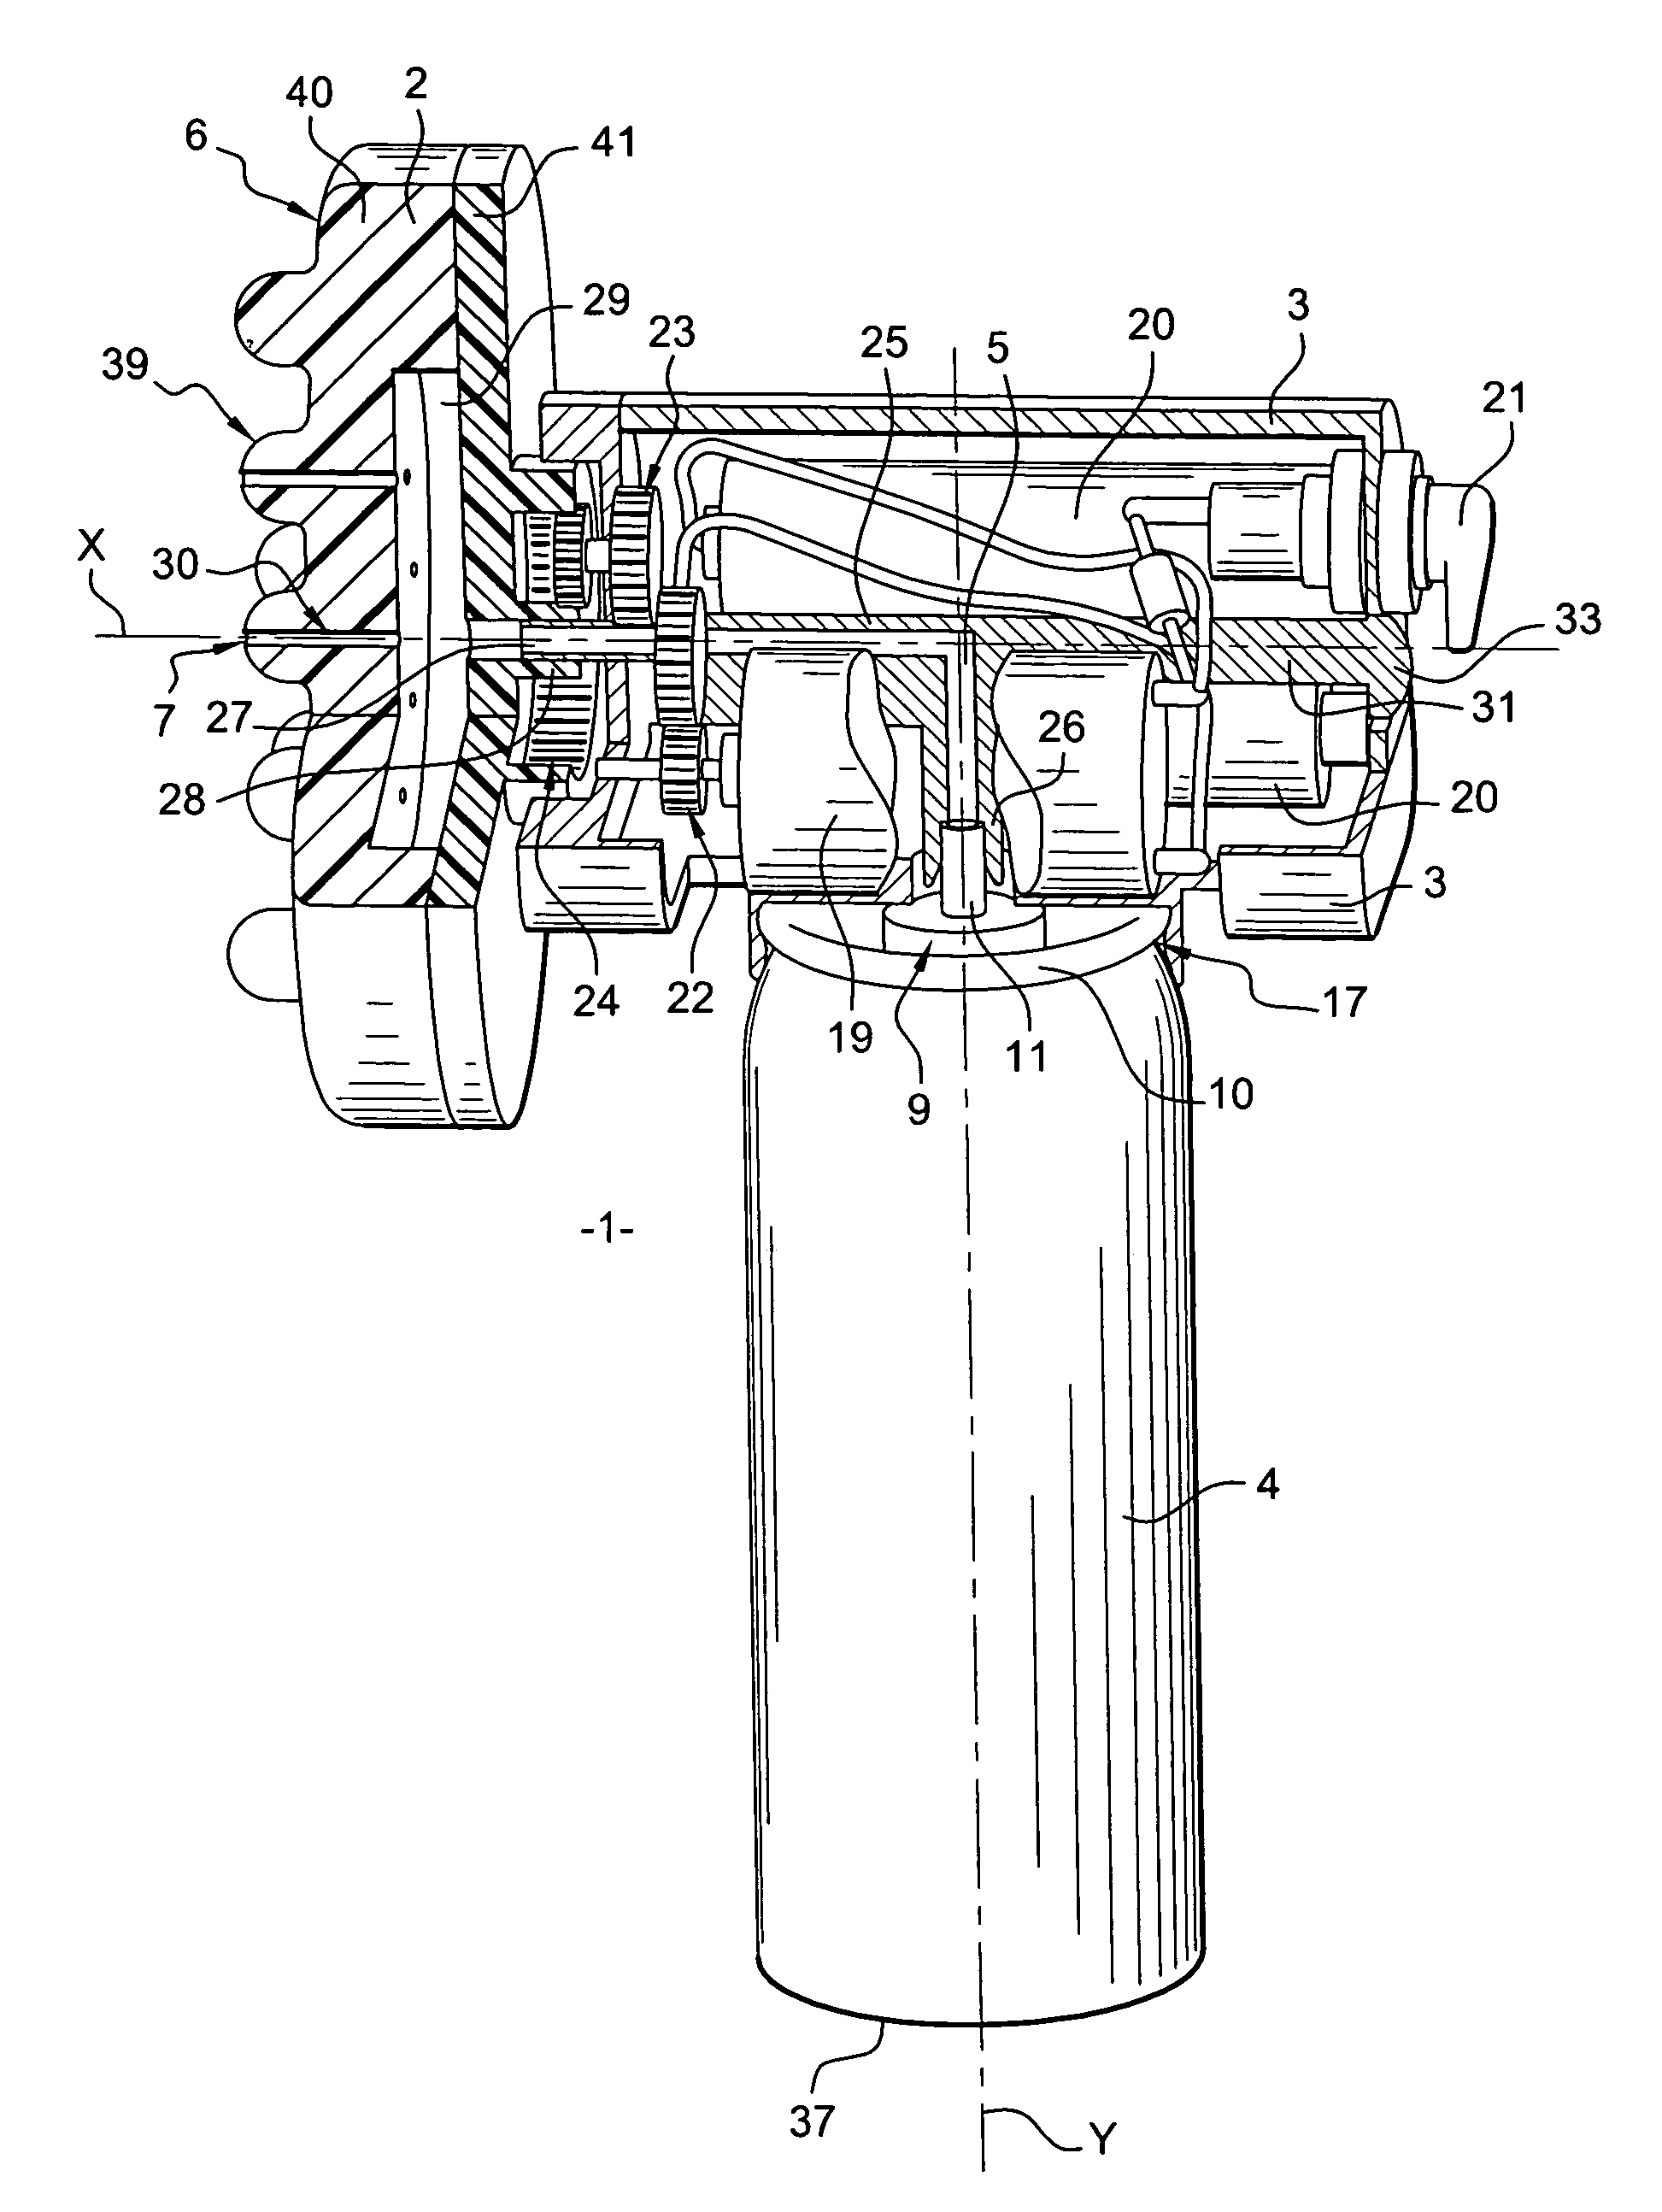 Massaging and/or dispensing device